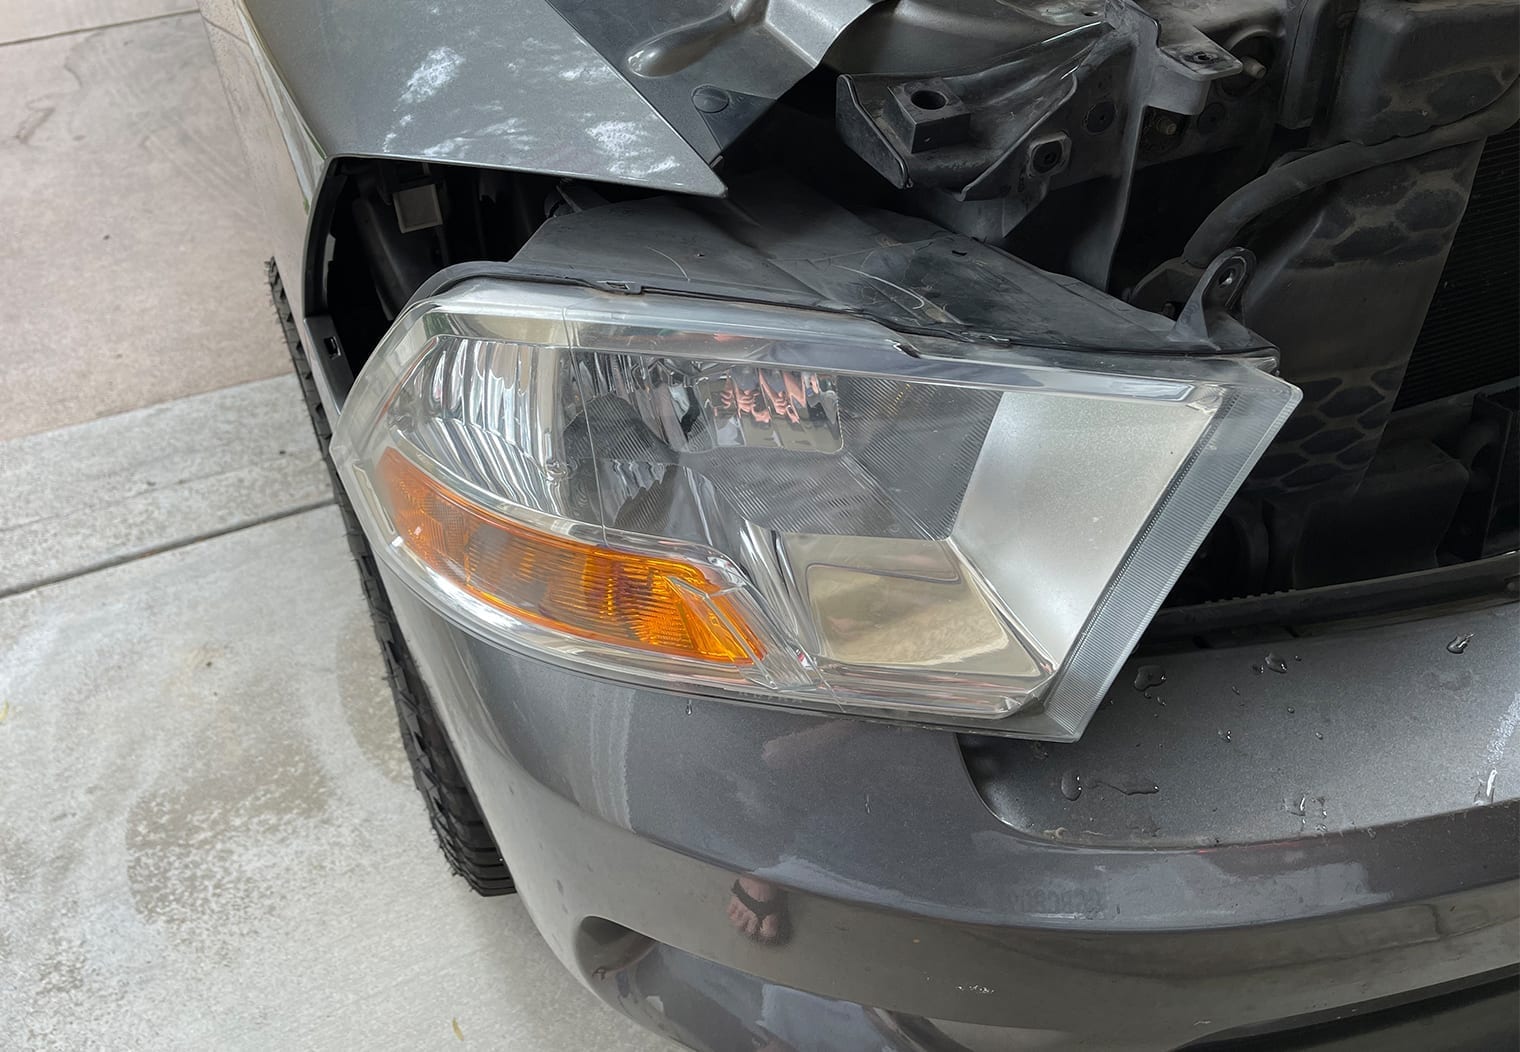 Image to show what it looks like as the ram 1500 headlight is removed from the truck